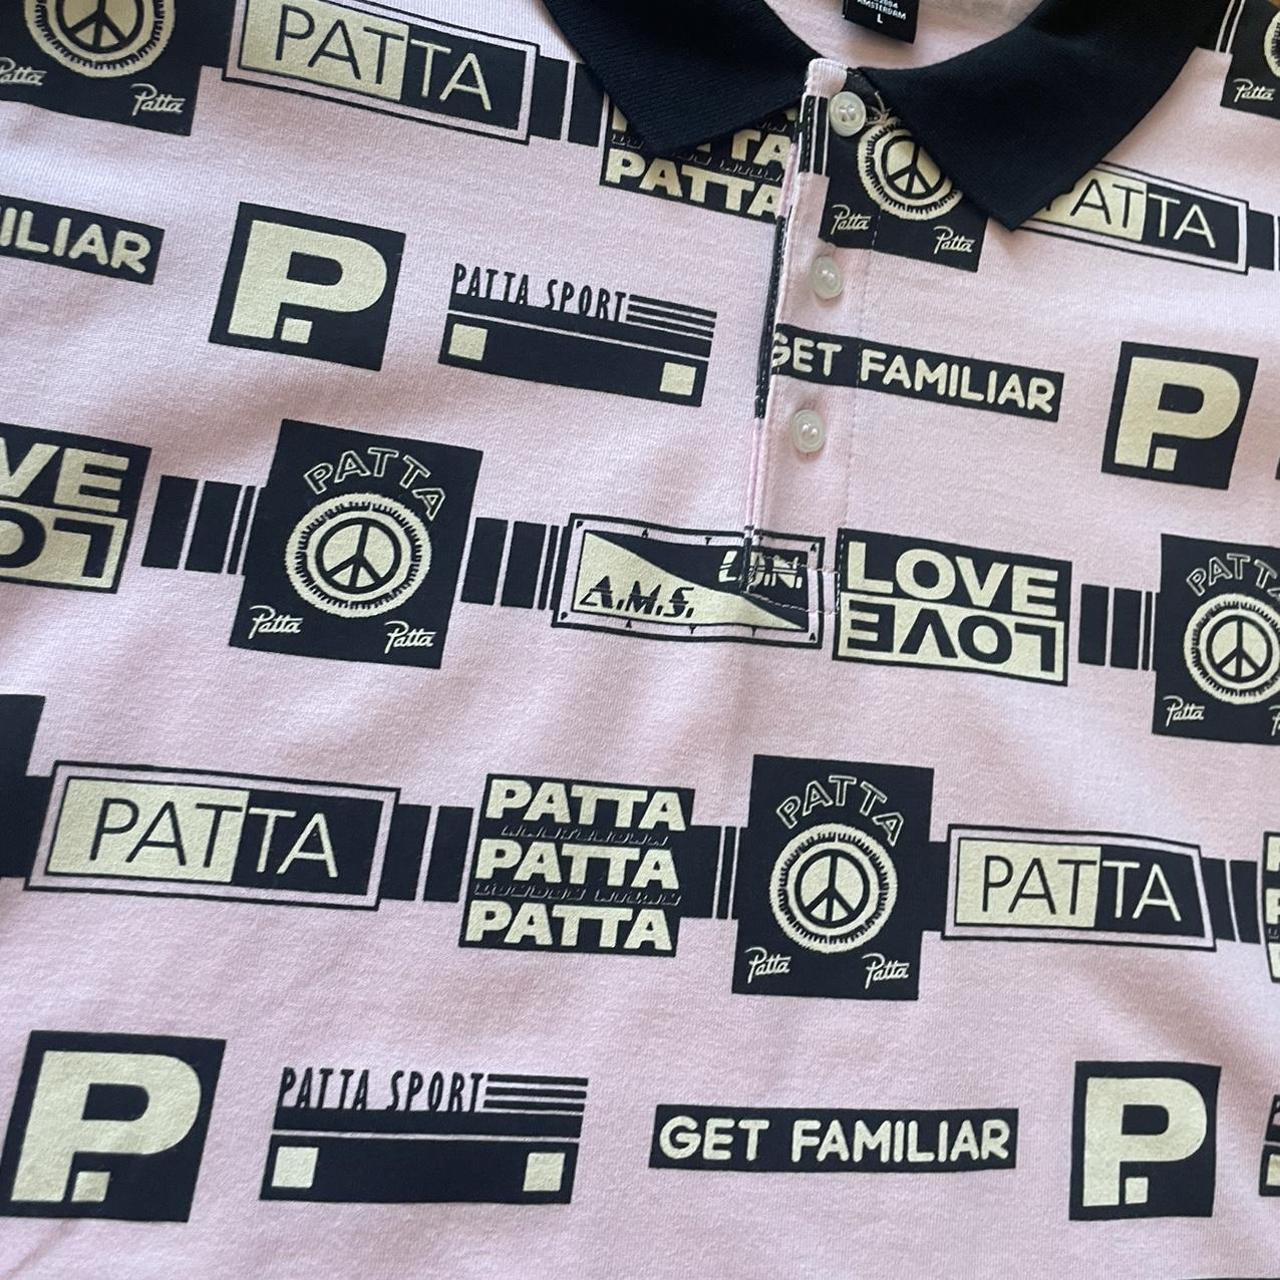 Patta Men's White and Pink Polo-shirts (2)